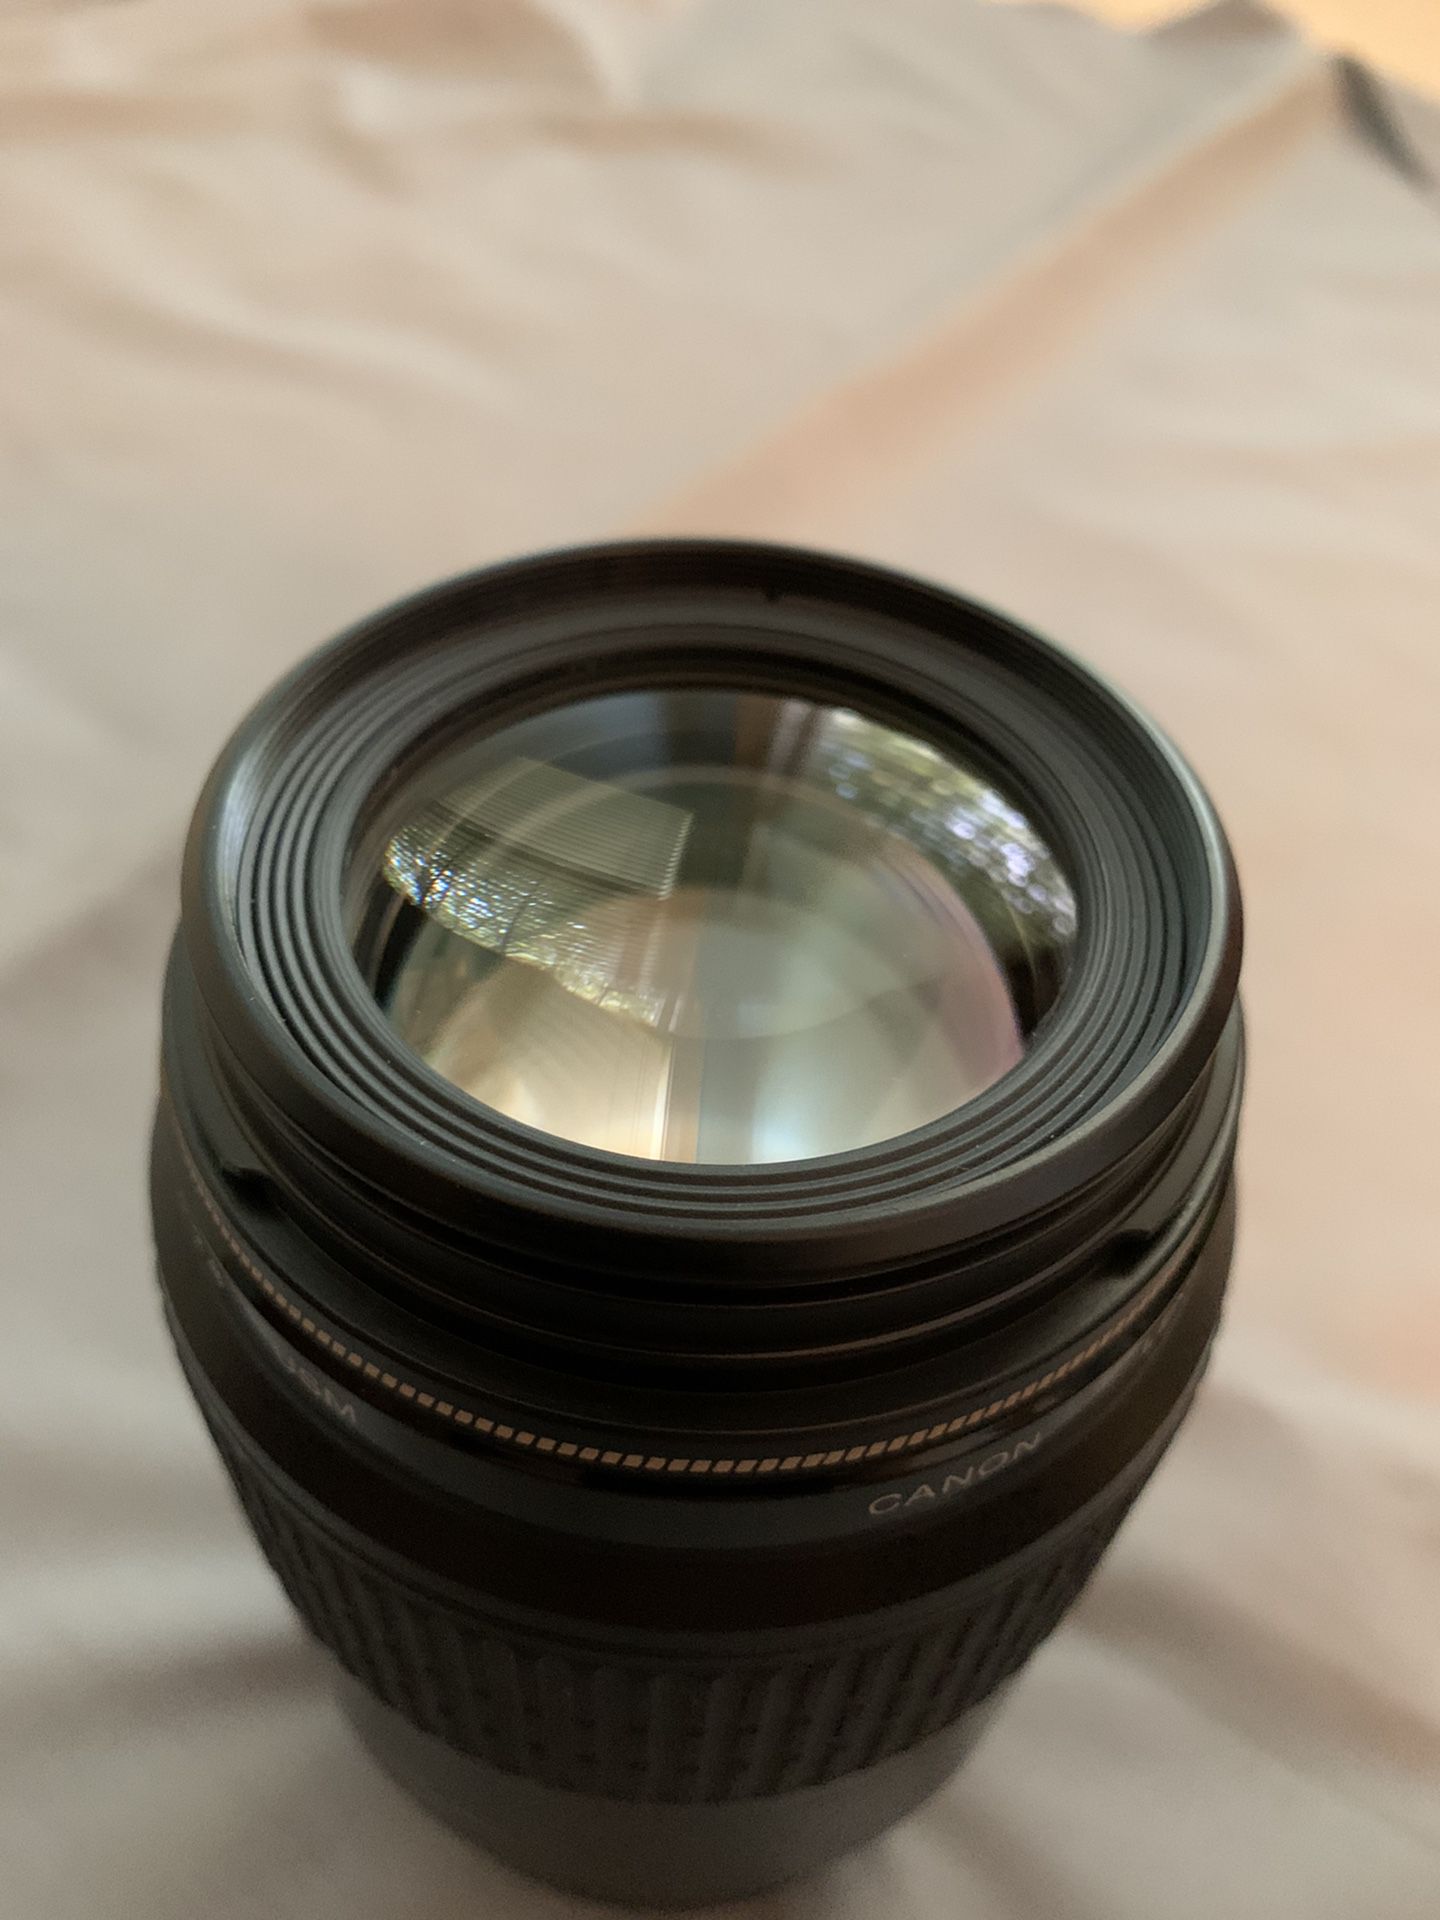 Canon EF 100mm f/2.8 Macro USM Fixed Lens for Canon SLR Cameras